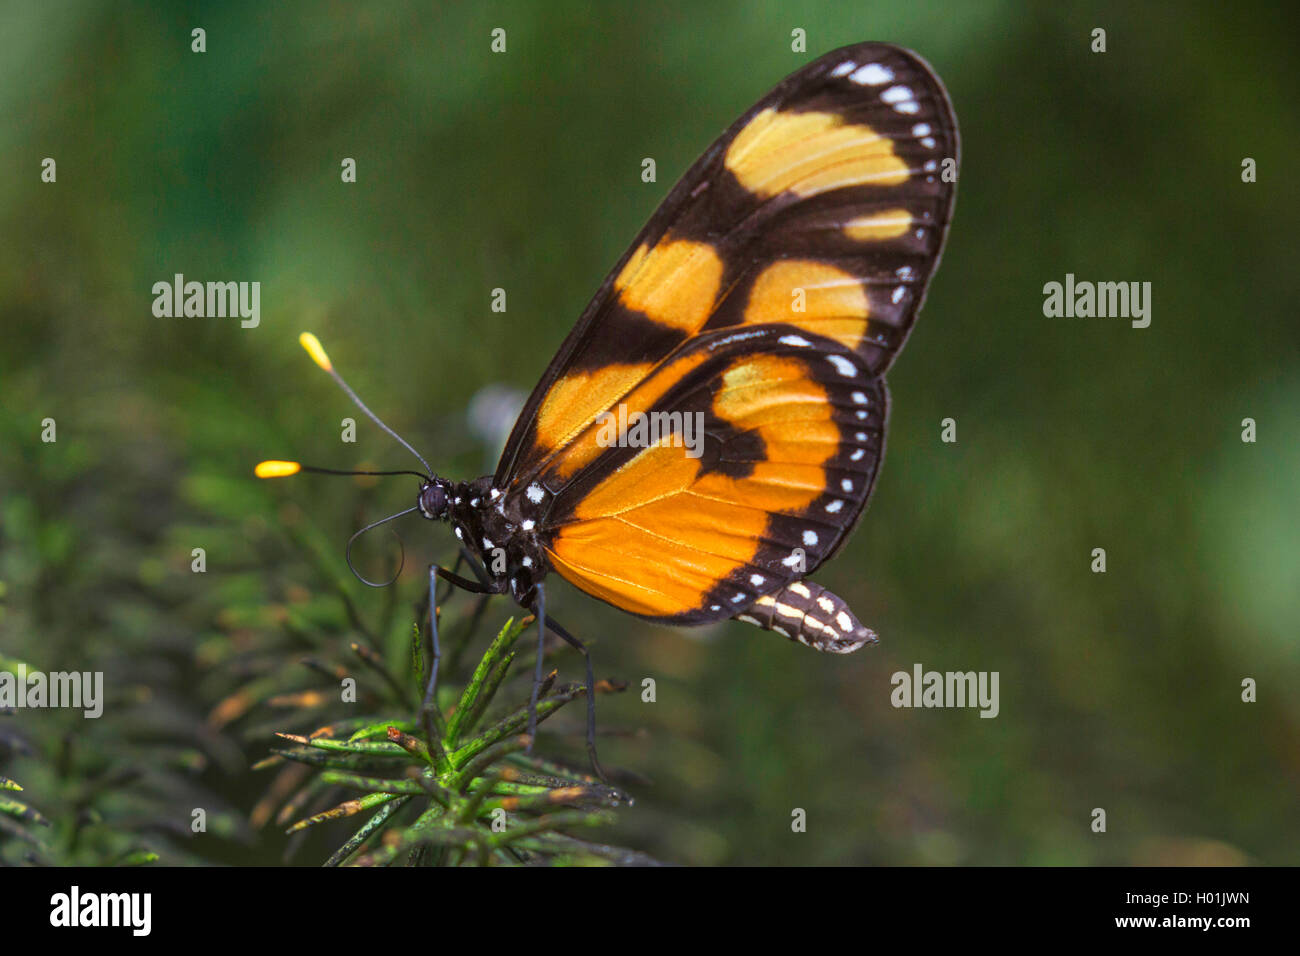 Nymphalidae (Nymphalidae), tropical butterfly sitting on a twig, side view Stock Photo